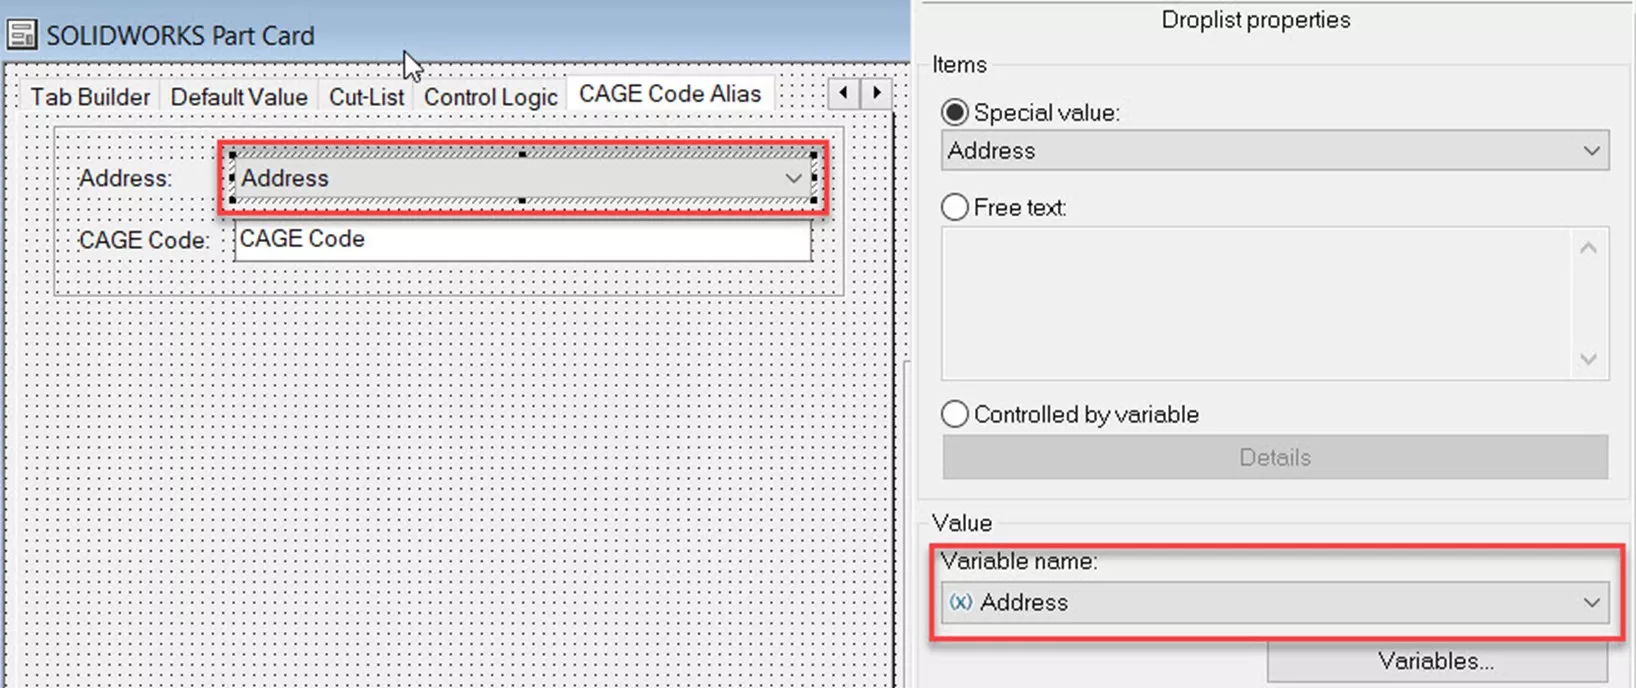 Create a Droplist control and assign it the Address variable in SOLIDWORKS PDM